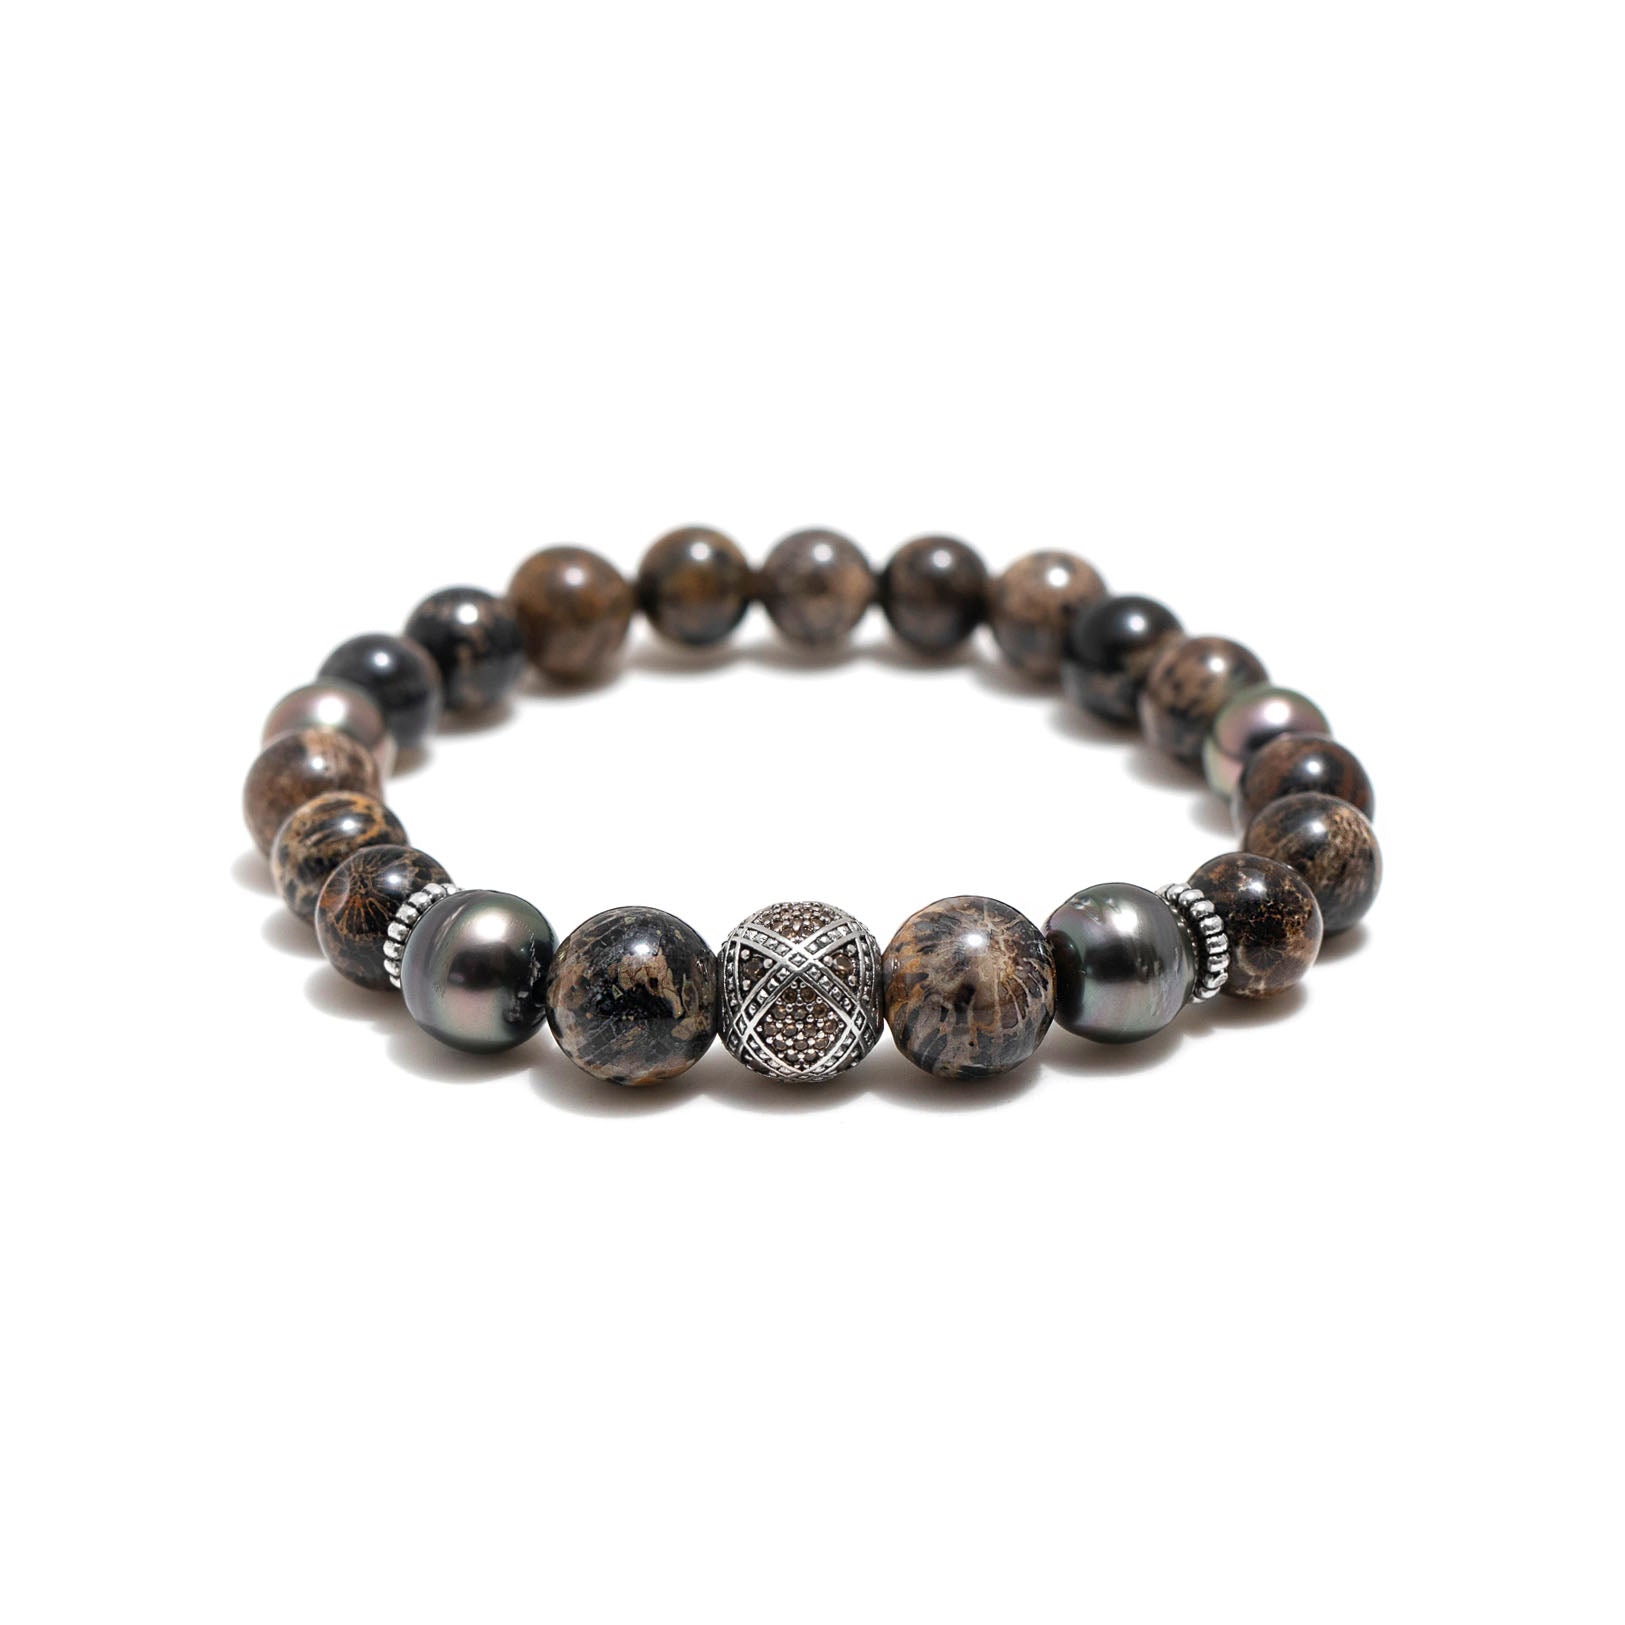 Beaded Silver Geometric Pattern Focal, 4 Tahitian Pearl & Rare Black Fossilized Coral Bracelet